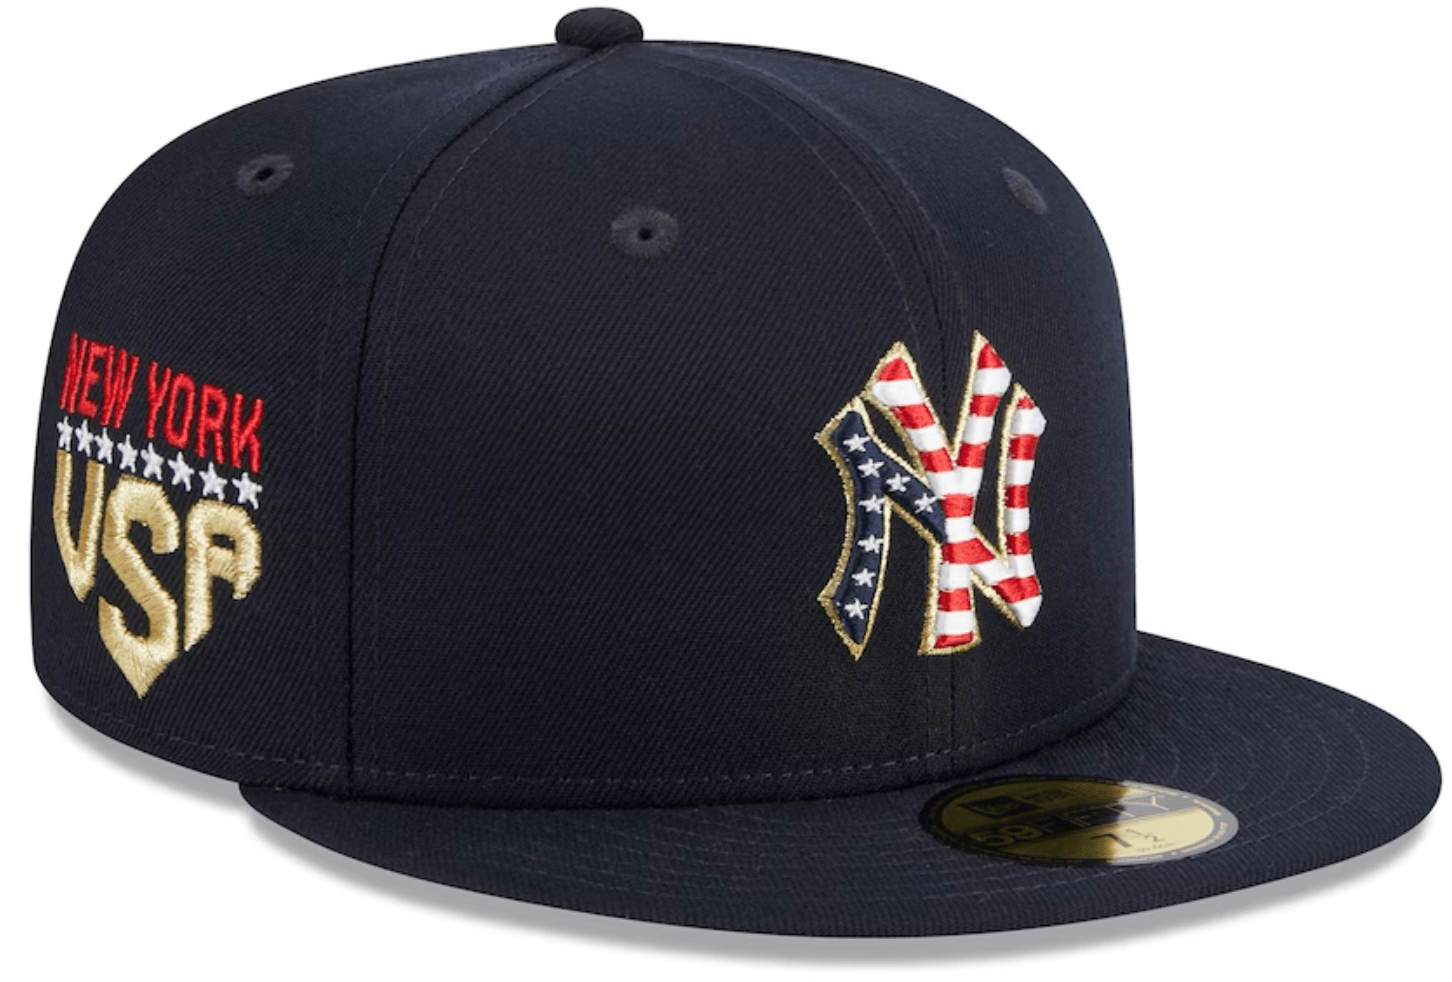 MLB Releases Stars/Stripes Caps for Independence Day